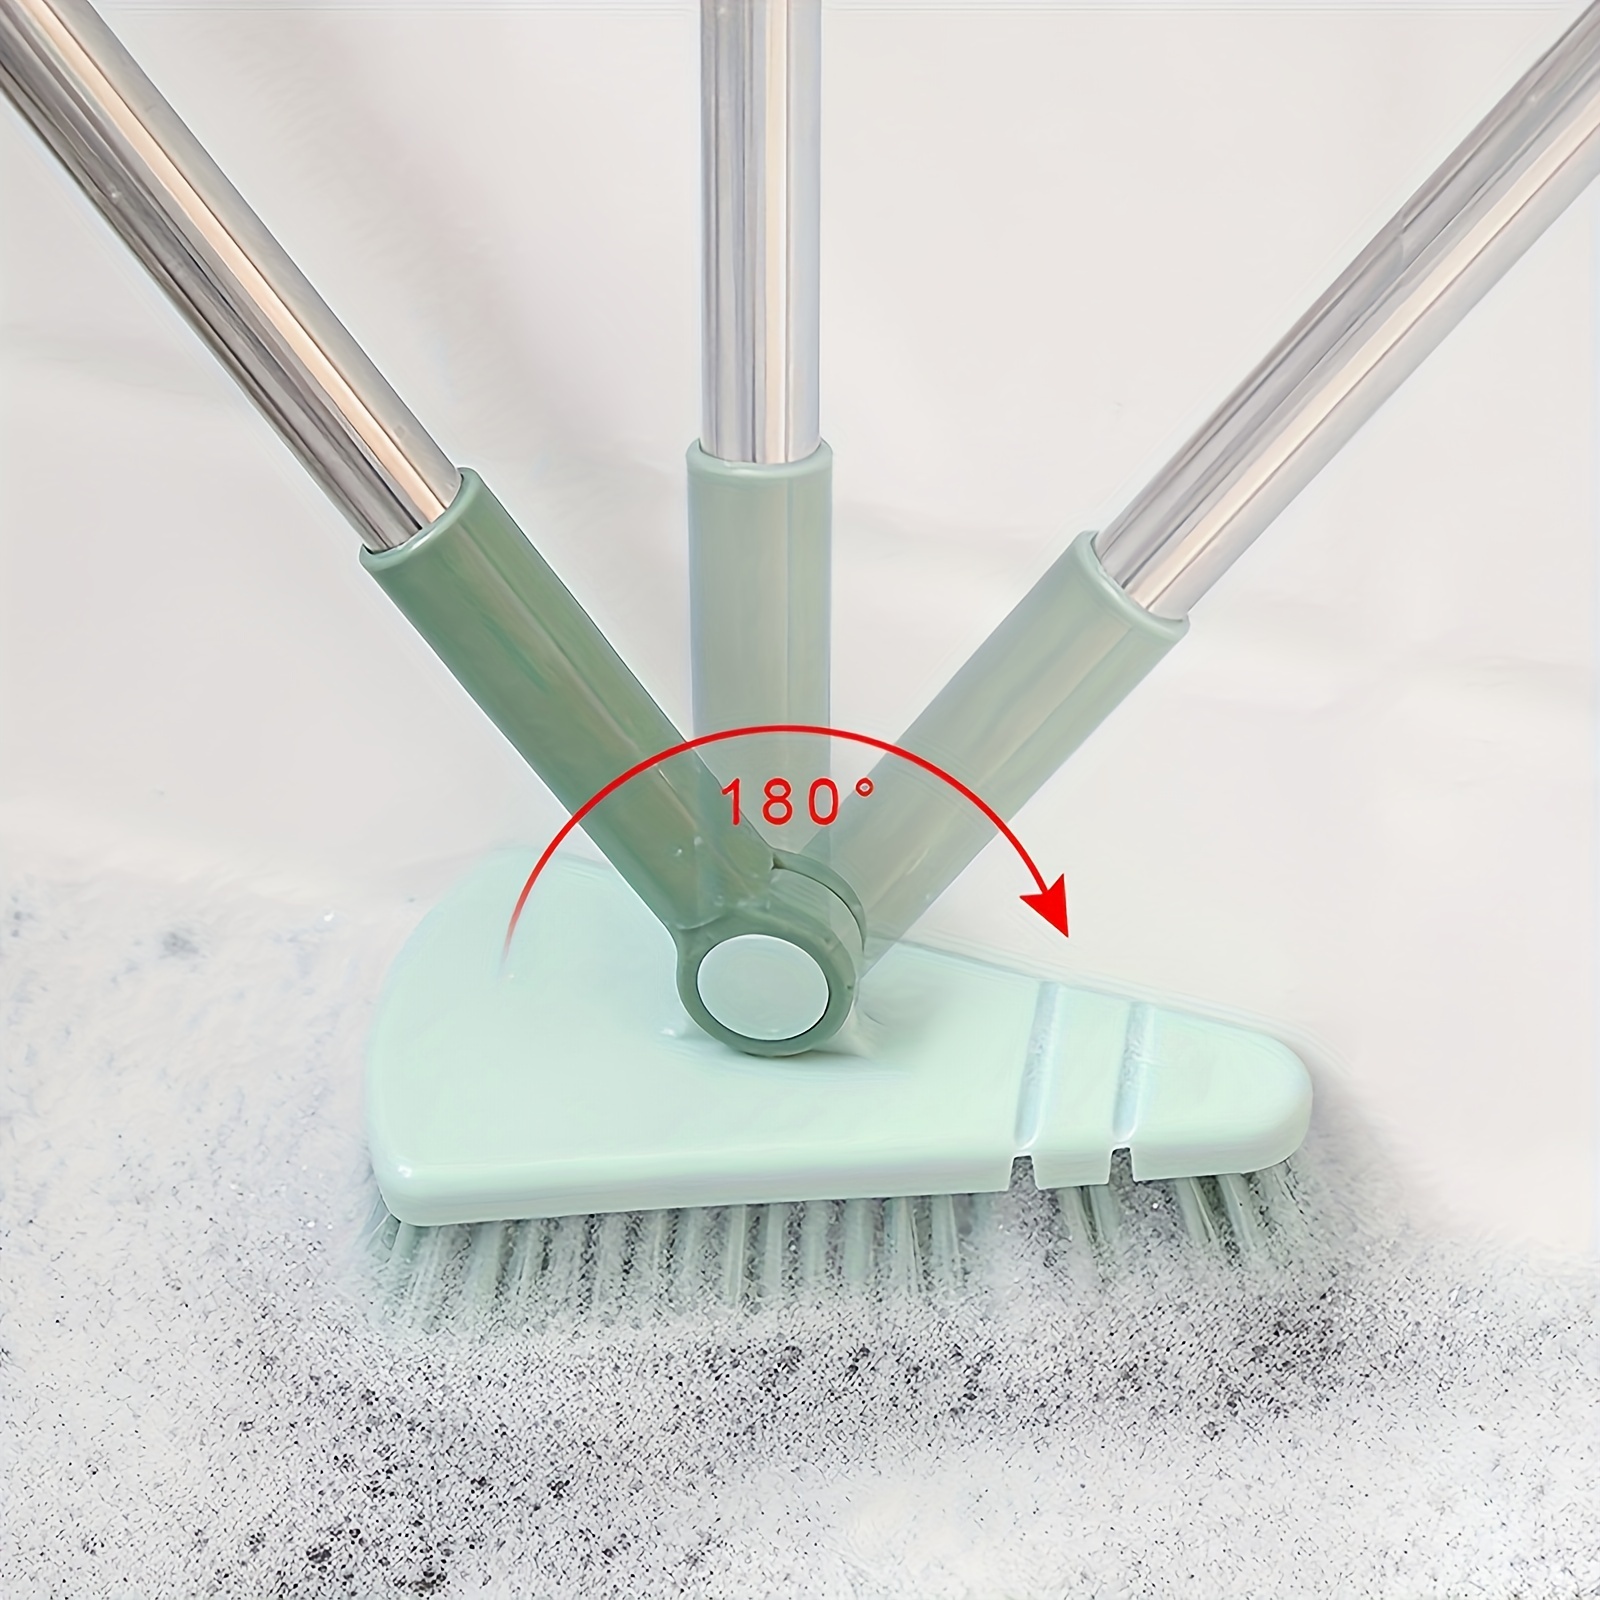 1pc Hard Bristle Cleaning Brush For Sink, Floor, Wall, Laundry